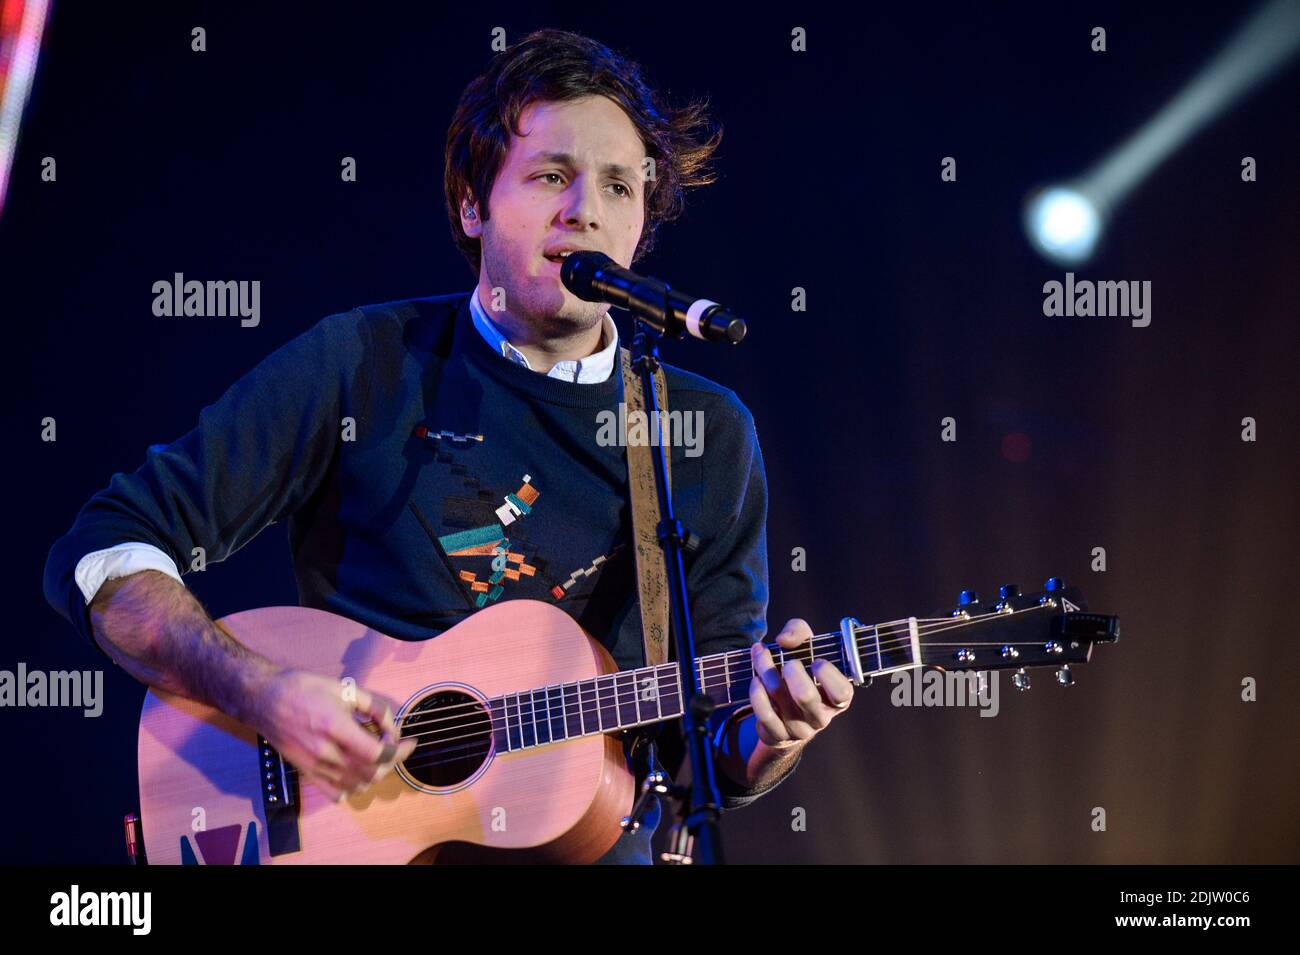 Vianney performs on stage during the Scoop Live concert at Amphitheatre Salle 3000 in Lyon, France on November 16, 2016. Photo by Julien Reynaud/APS-Medias/ABACAPRESS.COM Stock Photo